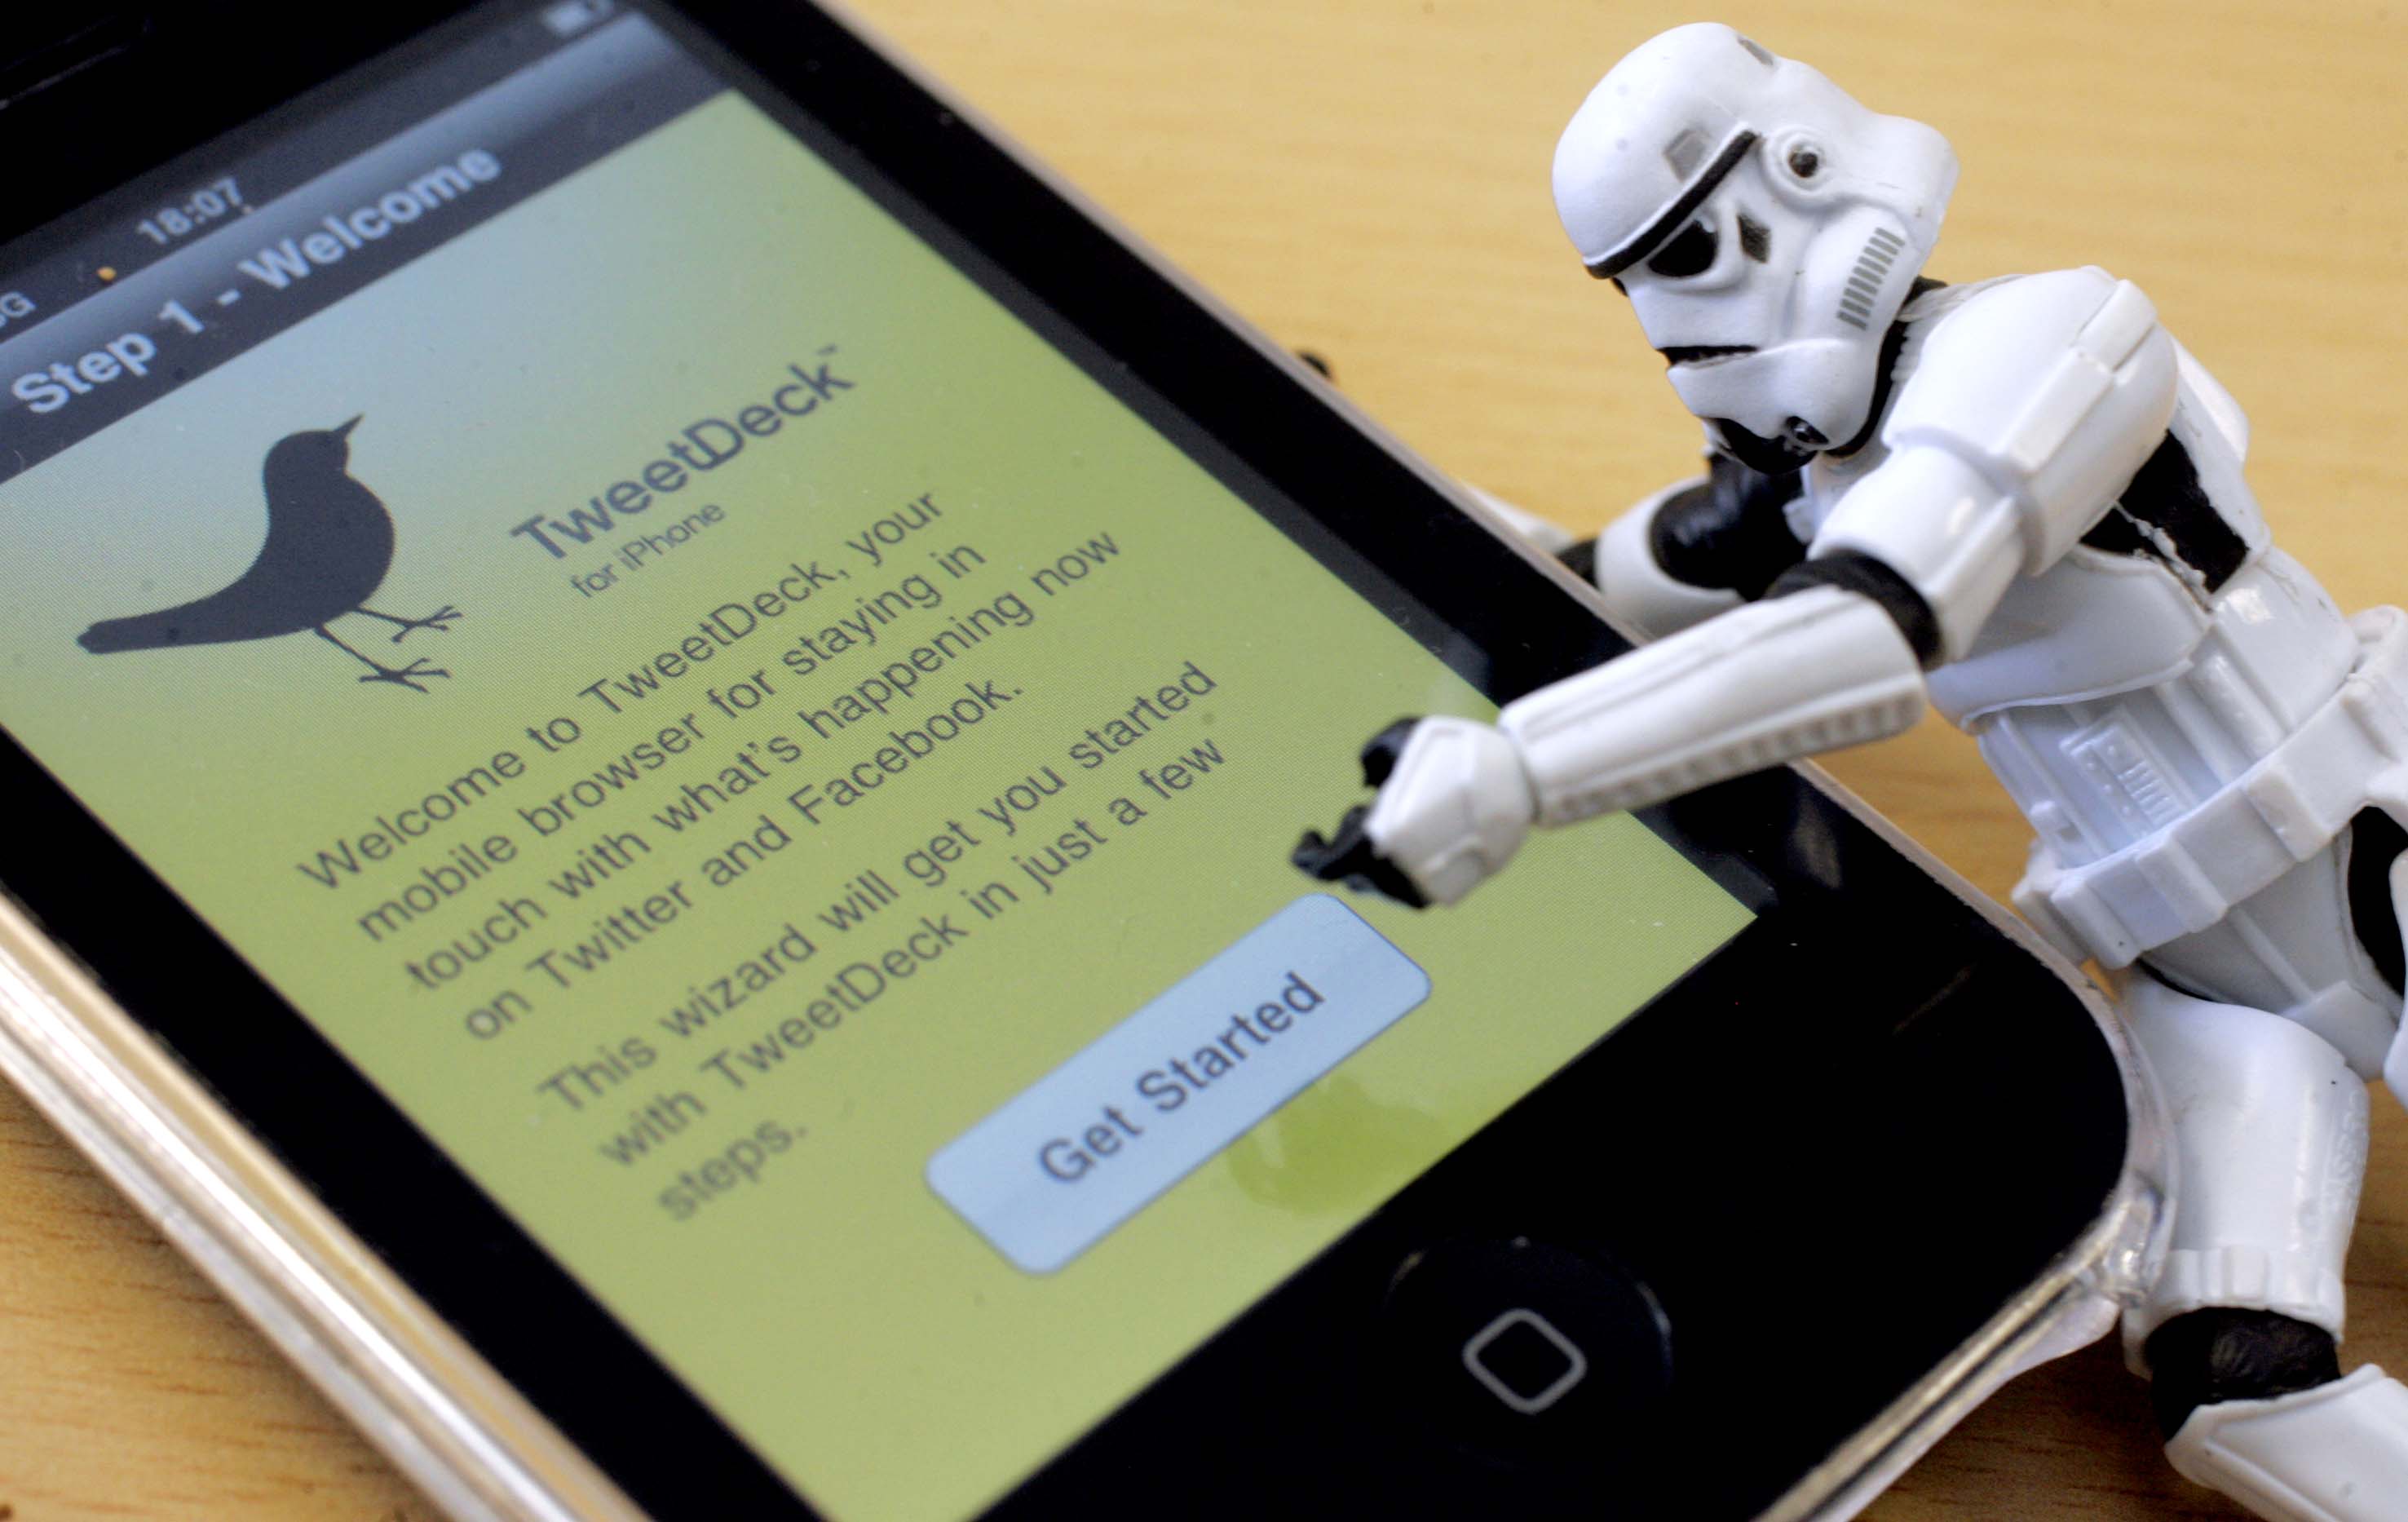 Star Wars movie teaches how wisdom and technology are not the same